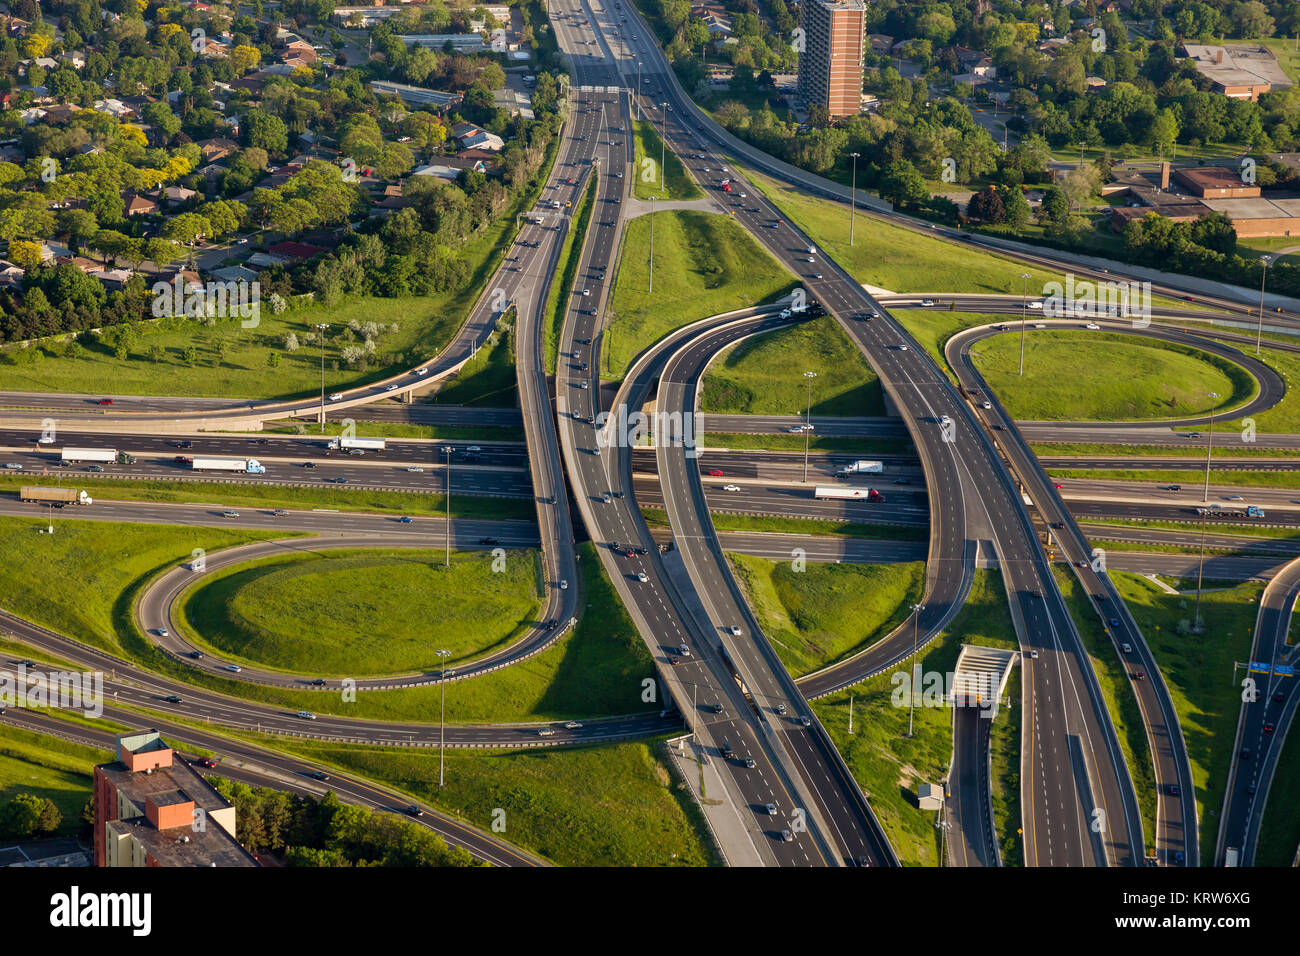 An aerial view of a highway interchange in Toronto Stock Photo